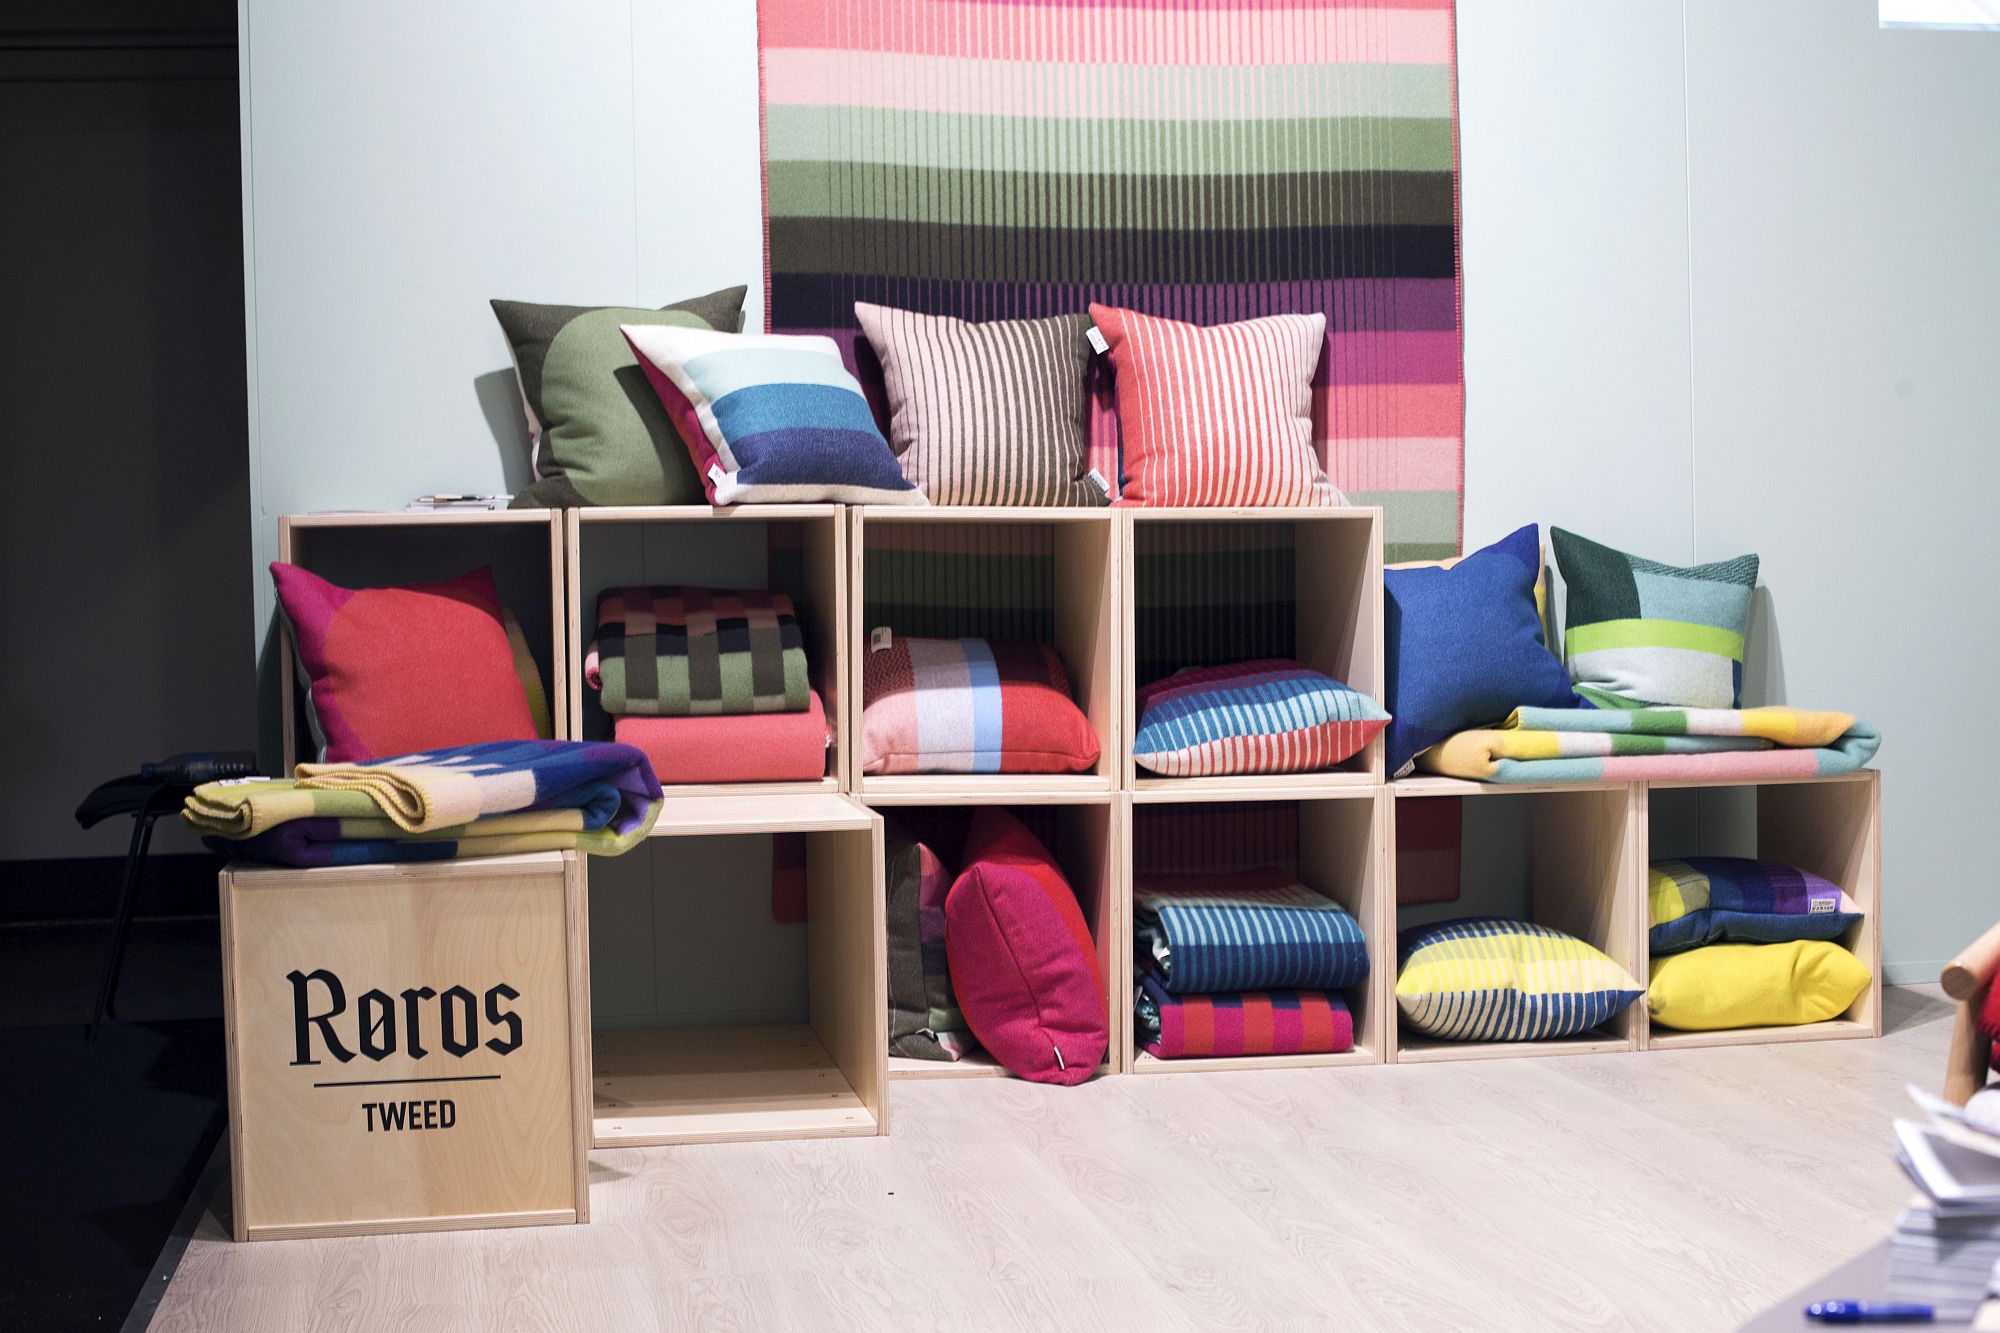 Luxurious and colorful textile display from Røros Tweed at IMM Cologne 2017